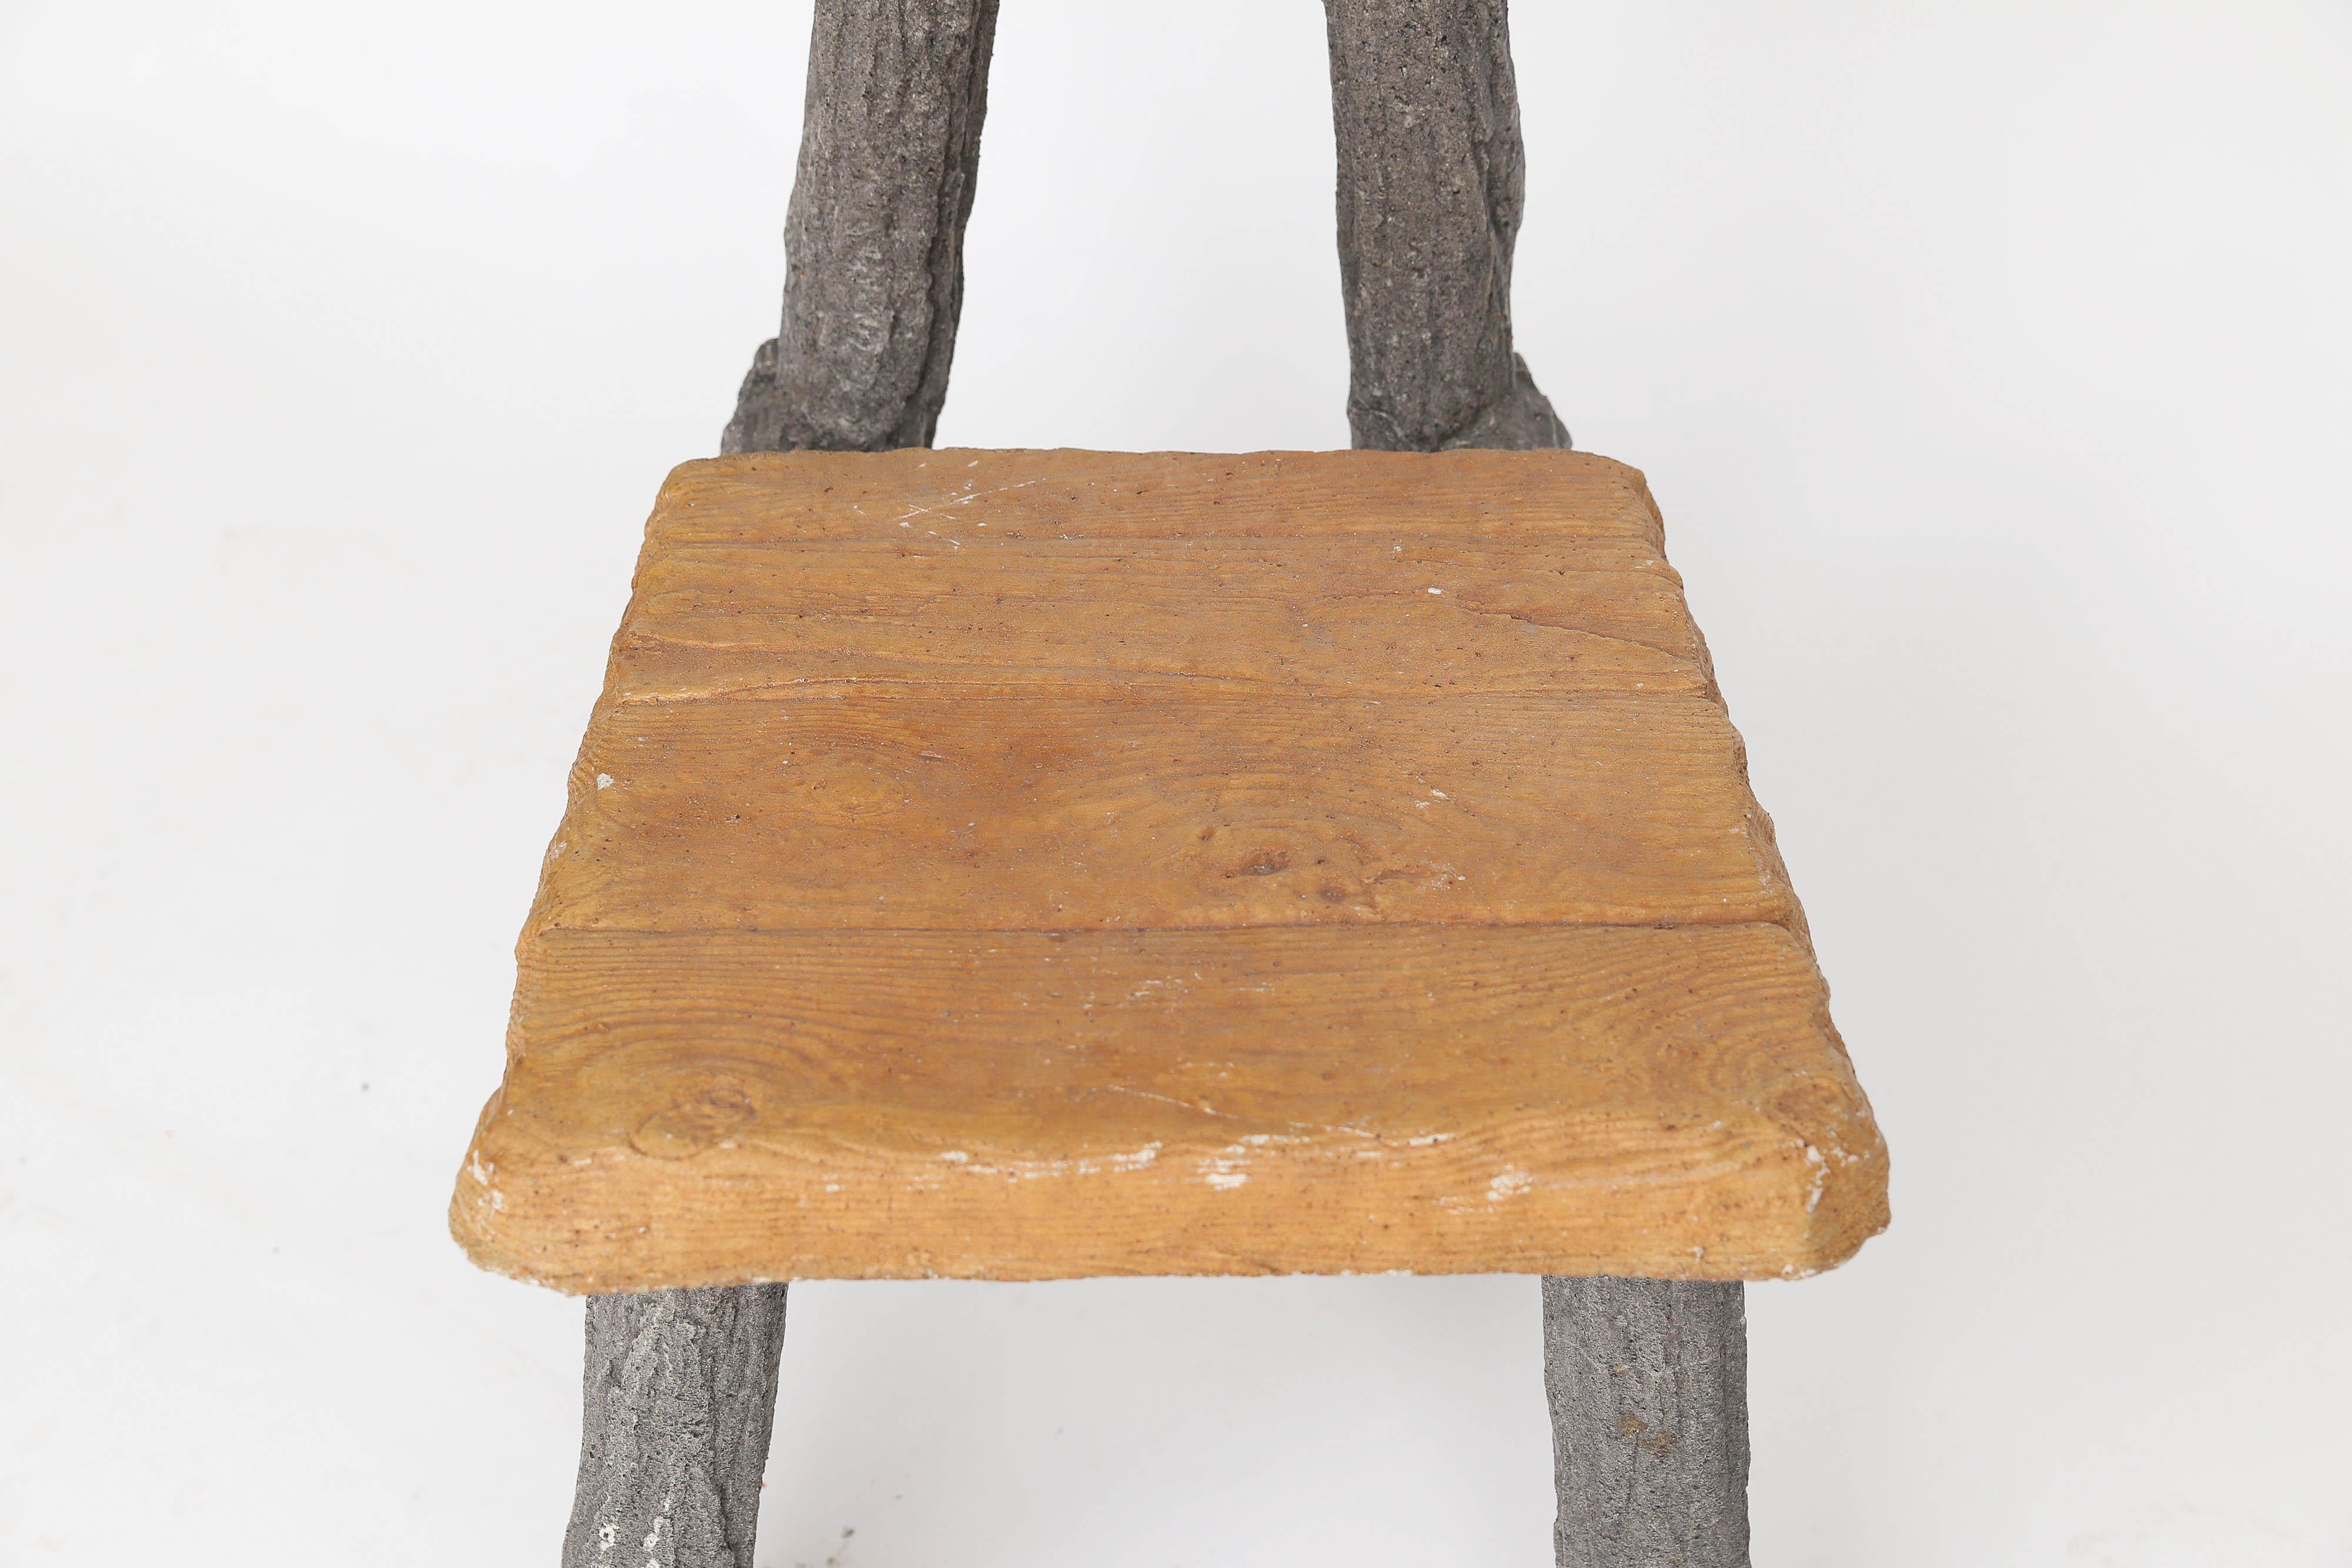 Made of concrete, an outstanding single faux bois chair found in France. This sturdy faux bois chair would be great indoors or outside in your garden. A fun and interesting conversation piece.